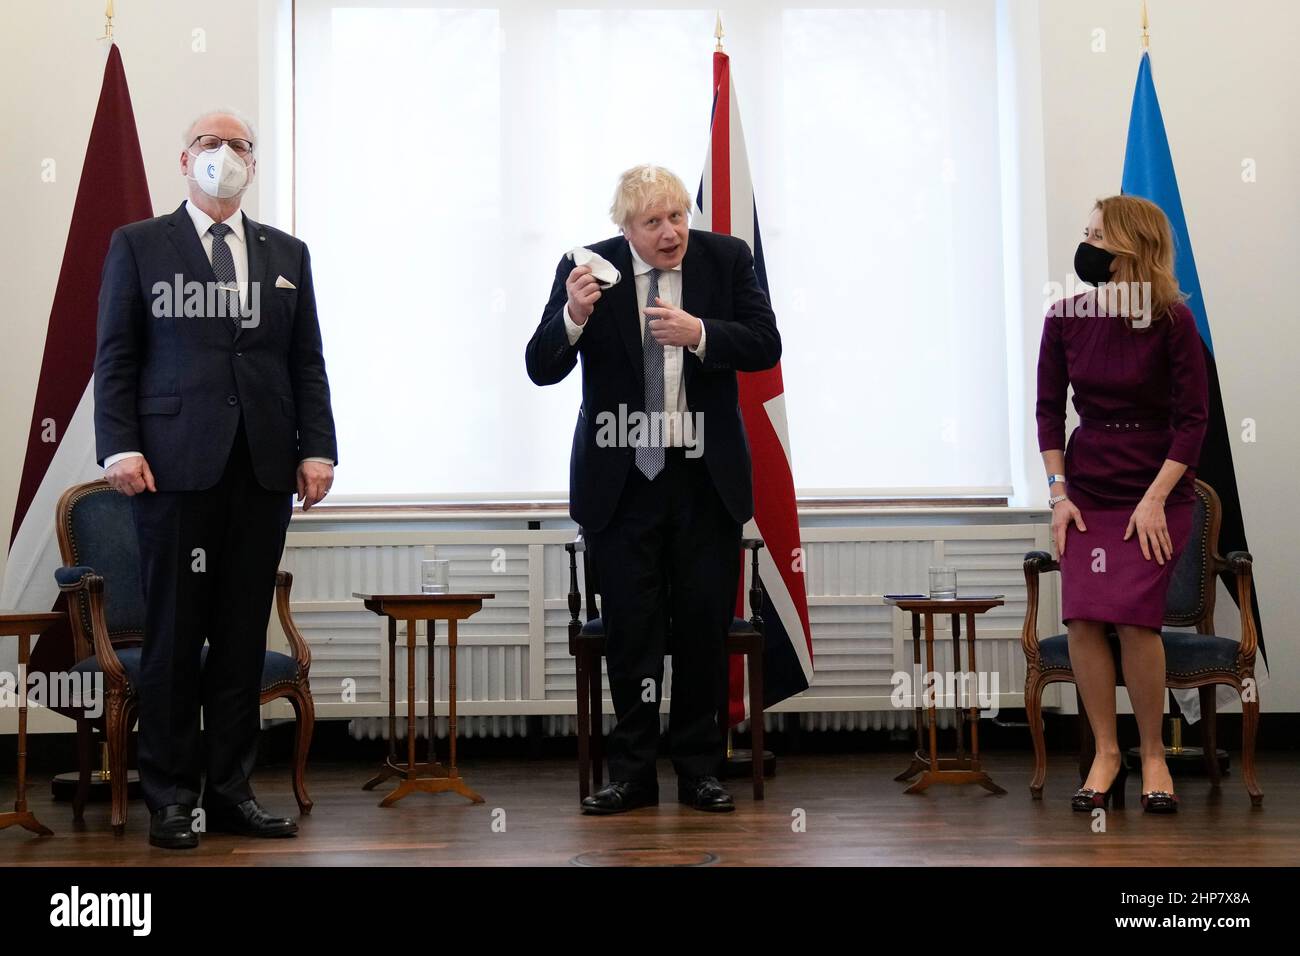 Prime Minister Boris Johnson (centre), meets with Estonia's Prime Minister Kaja Kallas and Latvian President Egils Levits at the Munich Security Conference in Germany where the he is meeting with world leaders to discuss tensions in eastern Europe. Picture date: Saturday February 19, 2022. Stock Photo